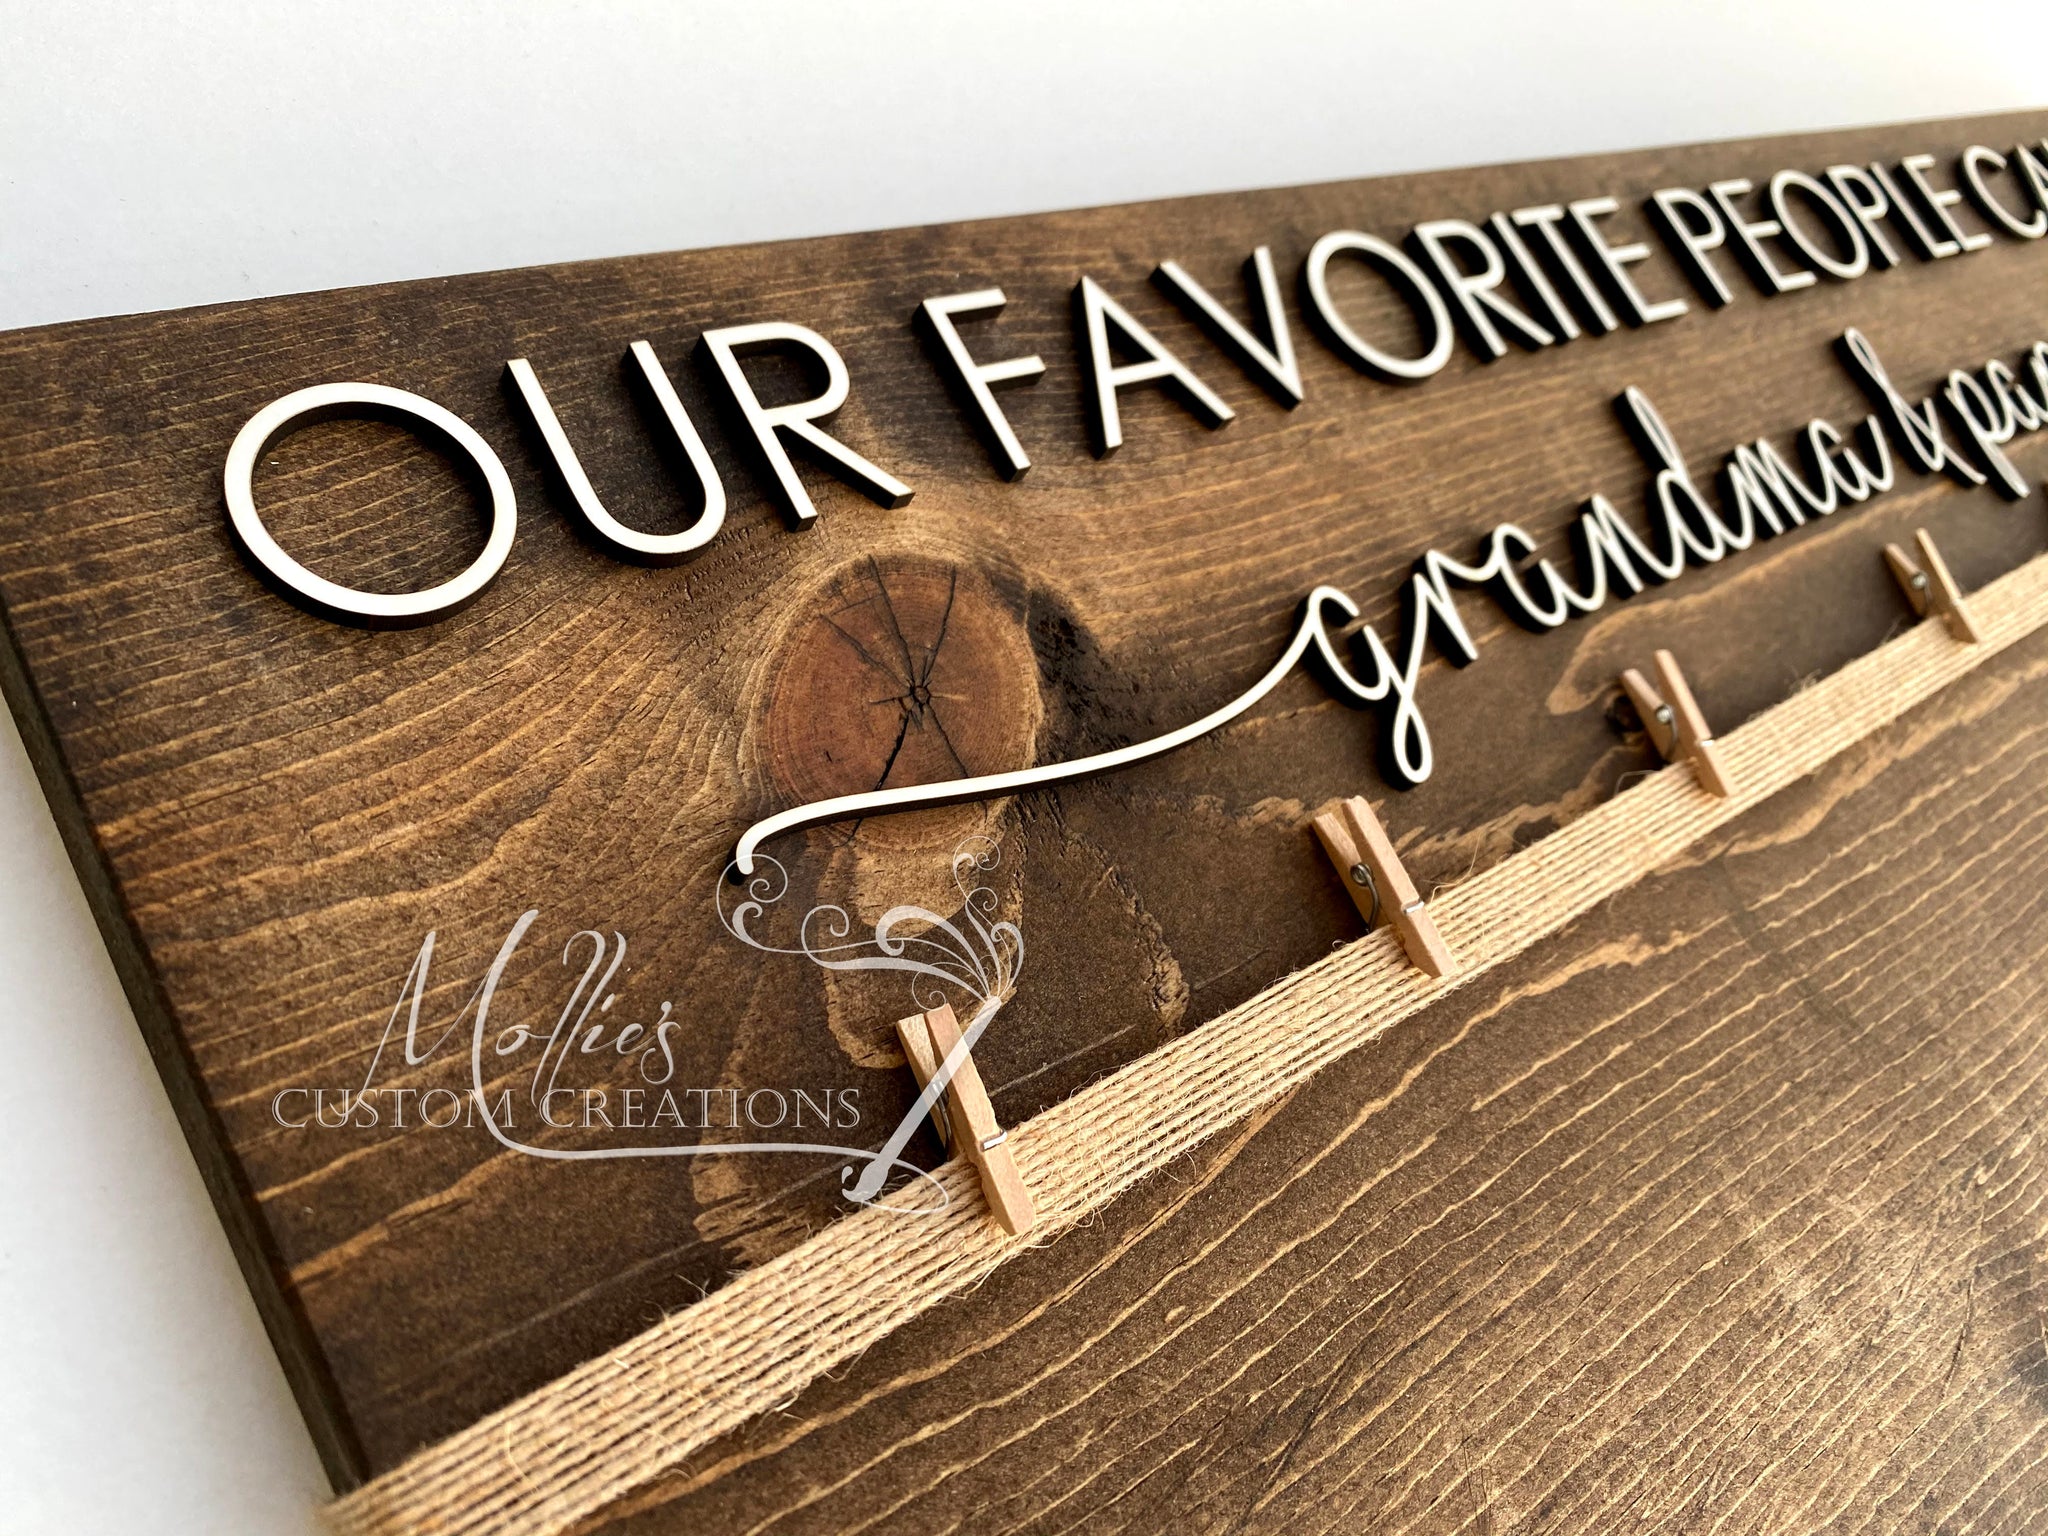 Personalized Gift For Grandma From Grandkids, Mother's Day Gifts For Grandma,  Grandma Sign With Kid Names - Best Personalized Gifts For Everyone